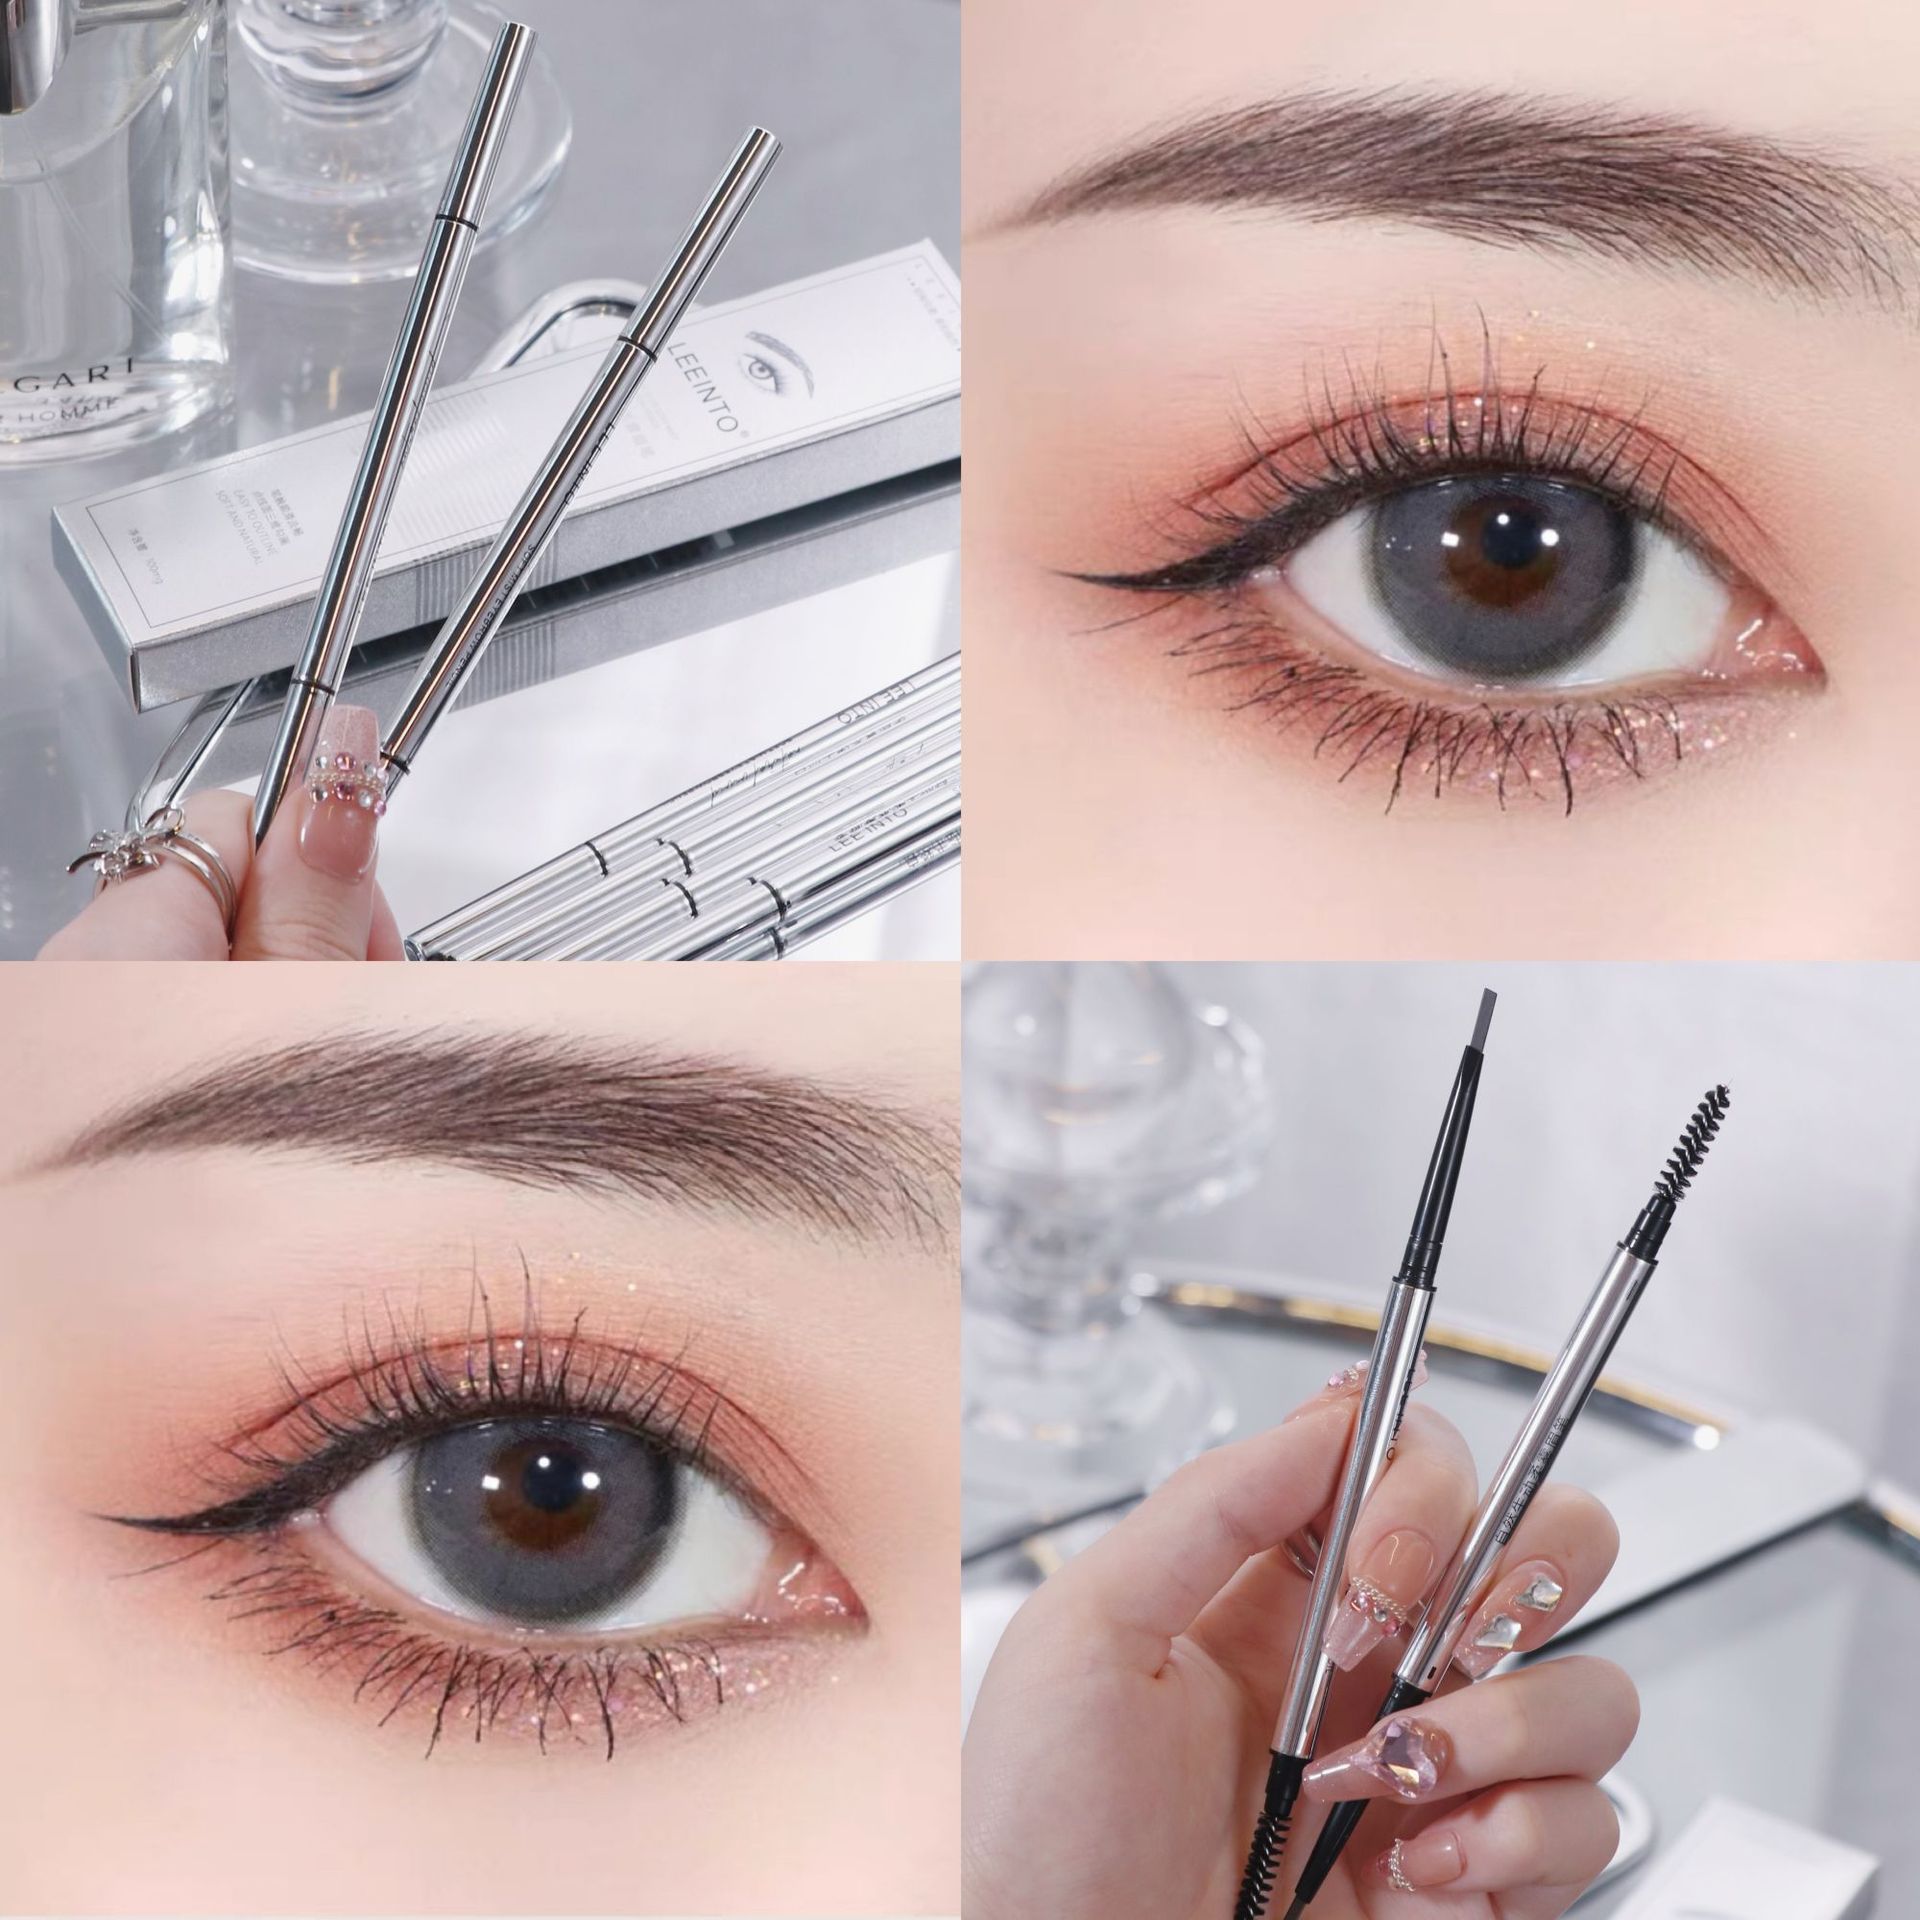 Lee into Natural Soft Mist Eyebrow Pencil Wild Eyebrow Double Head Extremely Thin Cosmetics Wholesale Waterproof Not Smudge Authentic